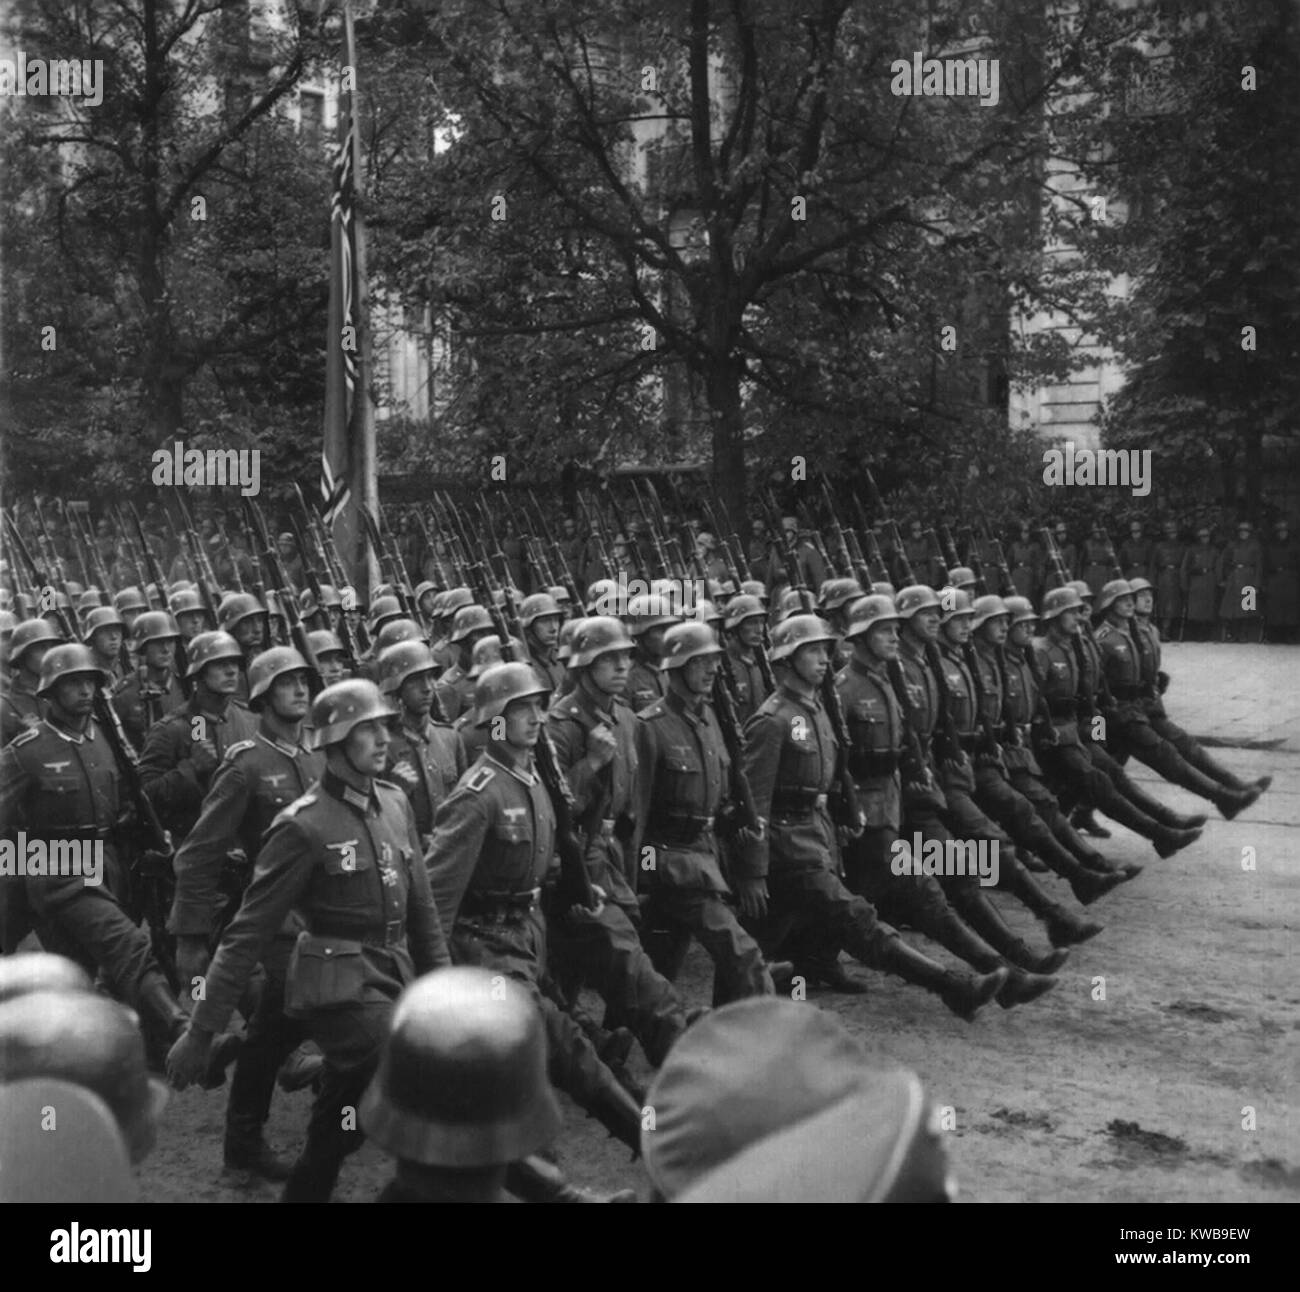 Goose-stepping German troops in a Victory parade through Warsaw, Poland. Sept. 1939. World War 2. (BSLOC 2014 10 285) Stock Photo